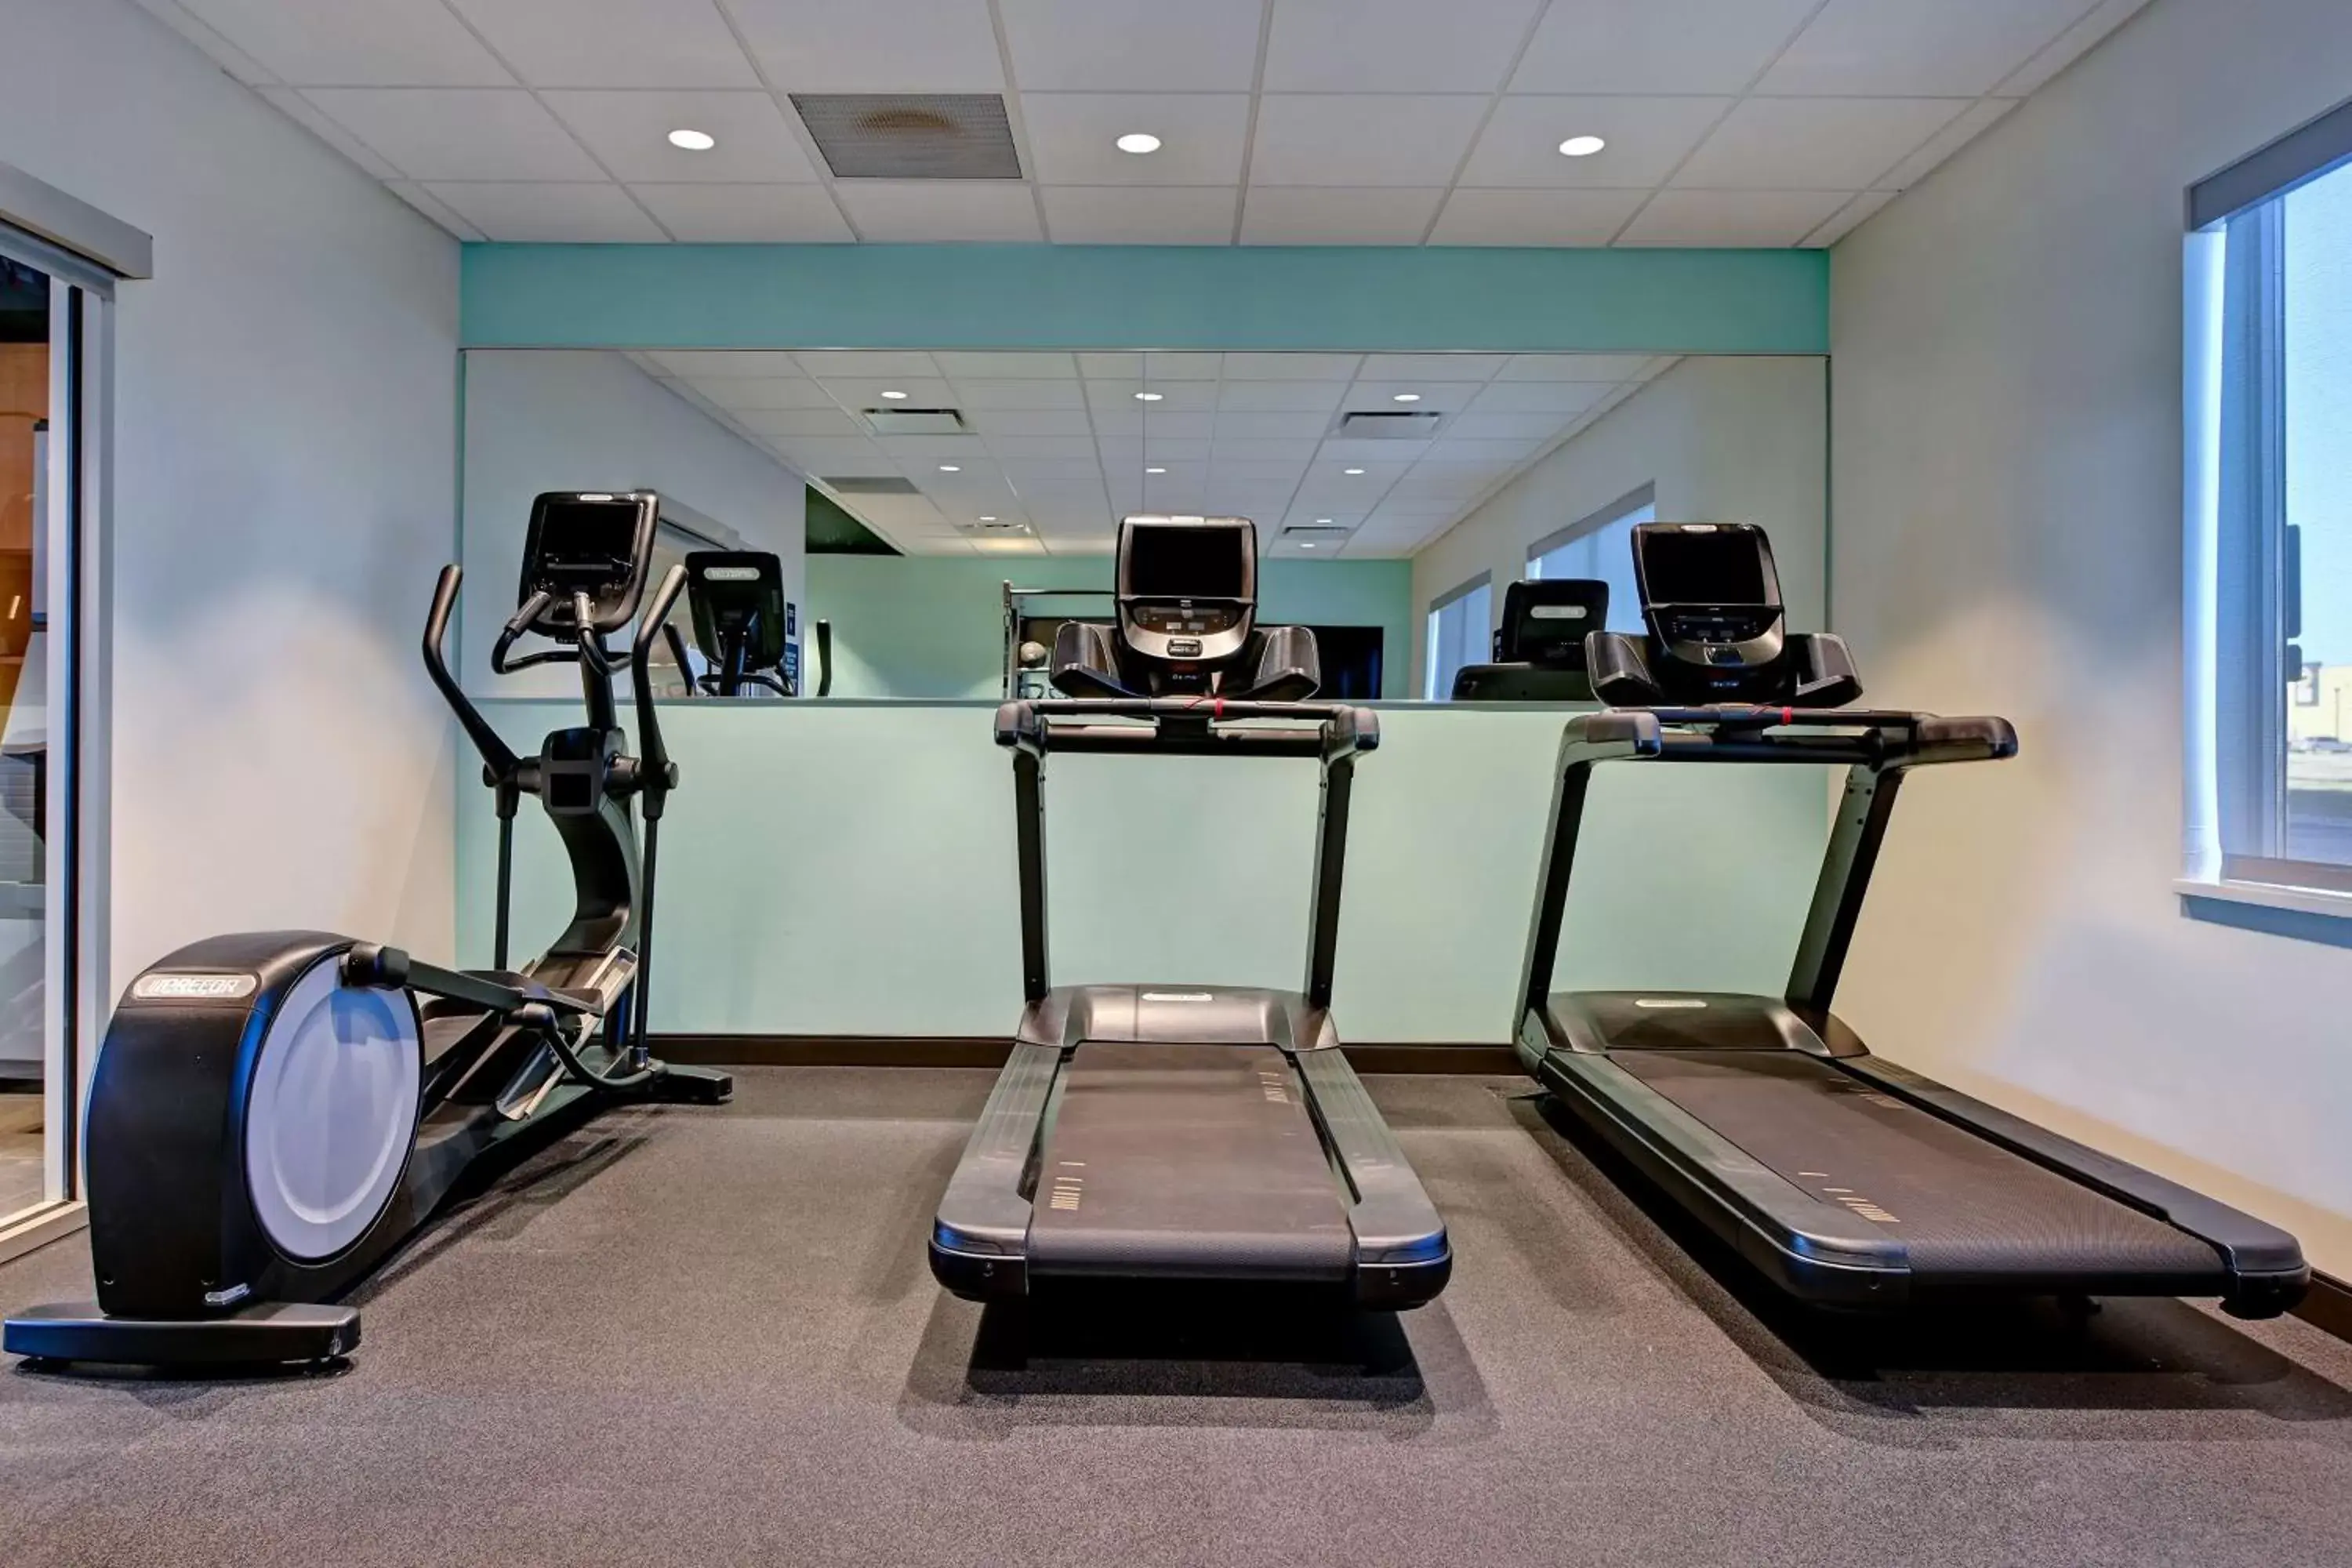 Fitness centre/facilities, Fitness Center/Facilities in Tru By Hilton Tahlequah, Ok